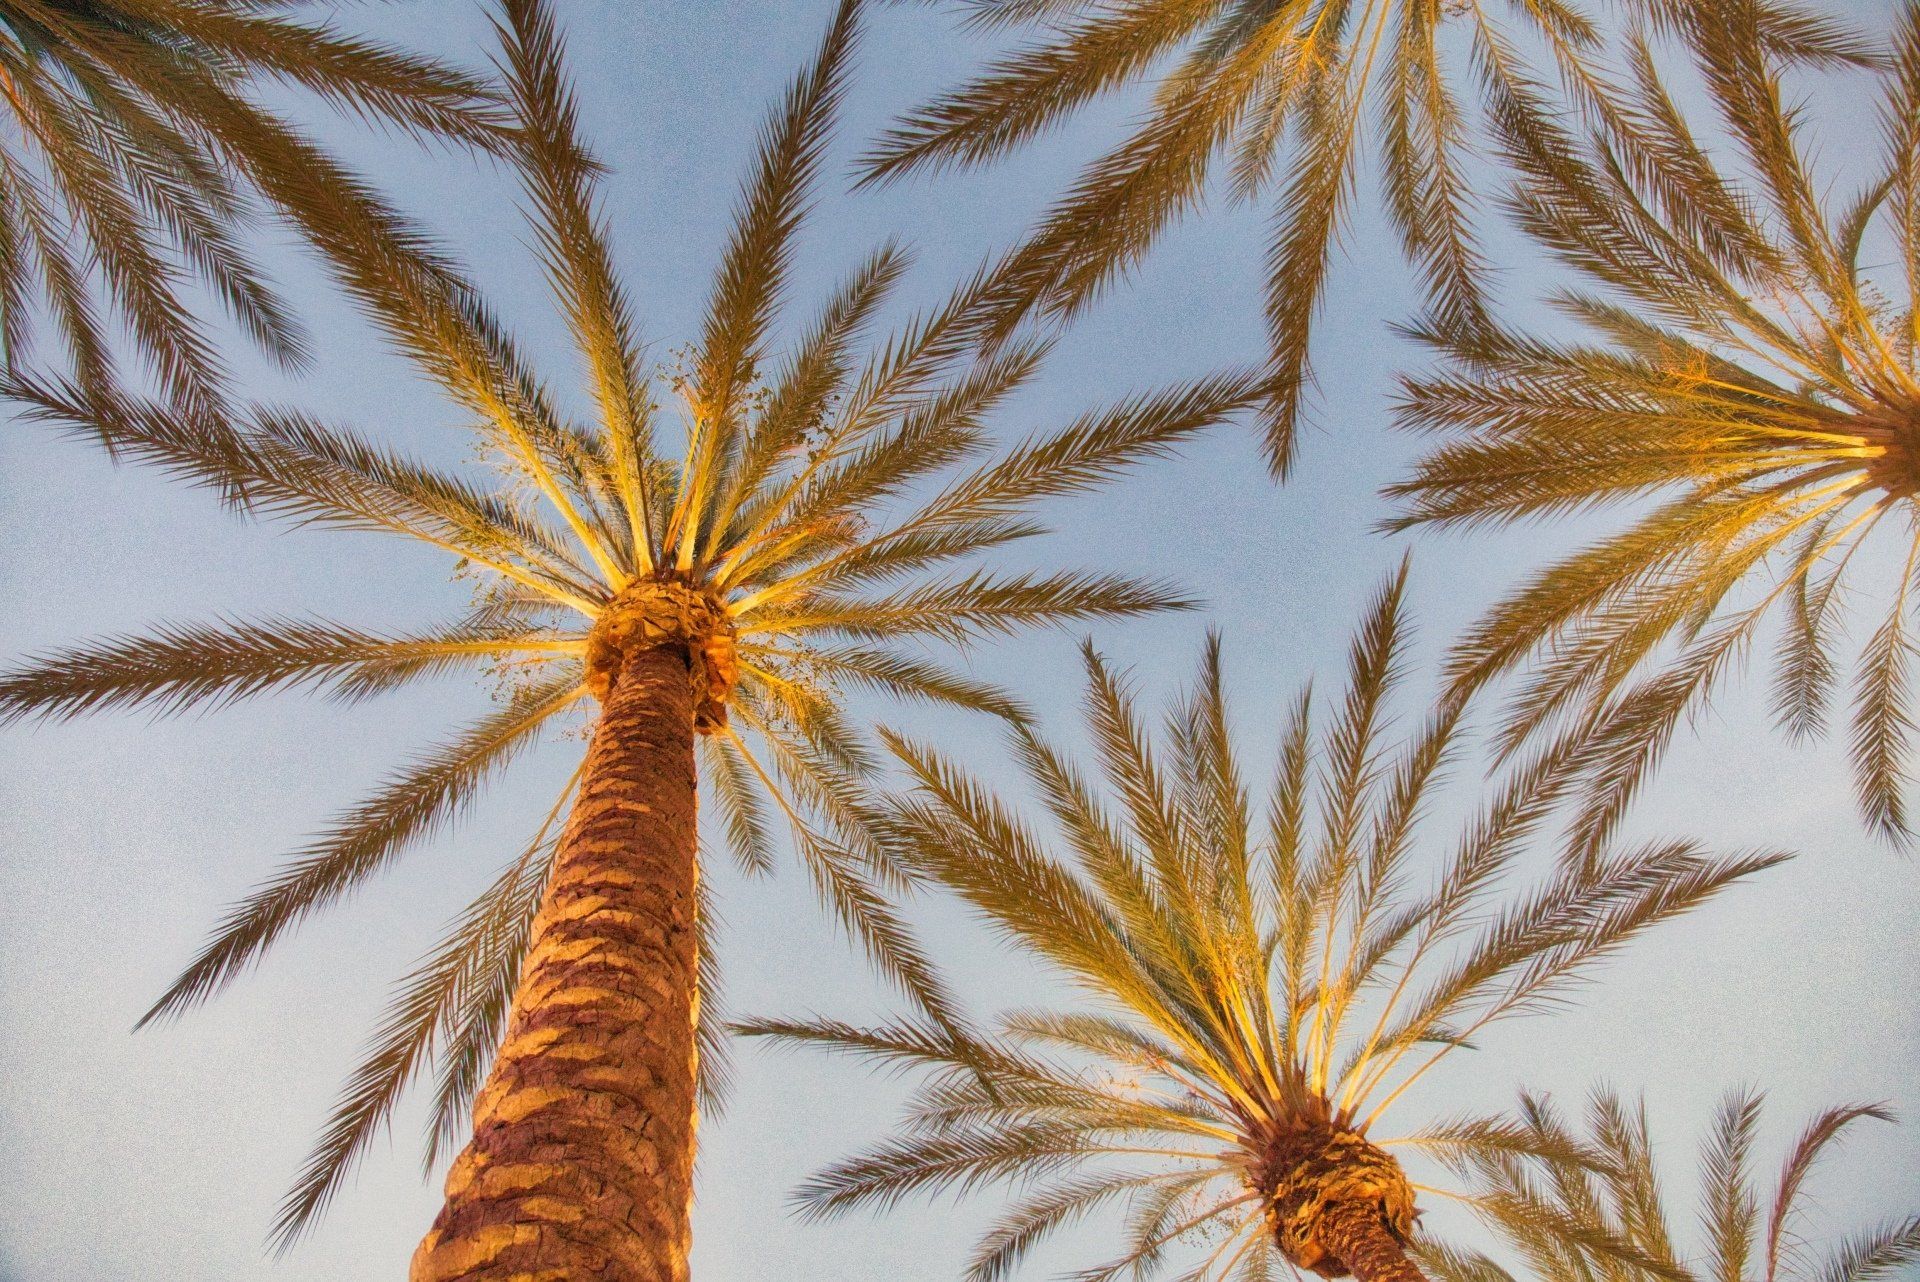 A group of palm trees against a blue sky in sunny California.